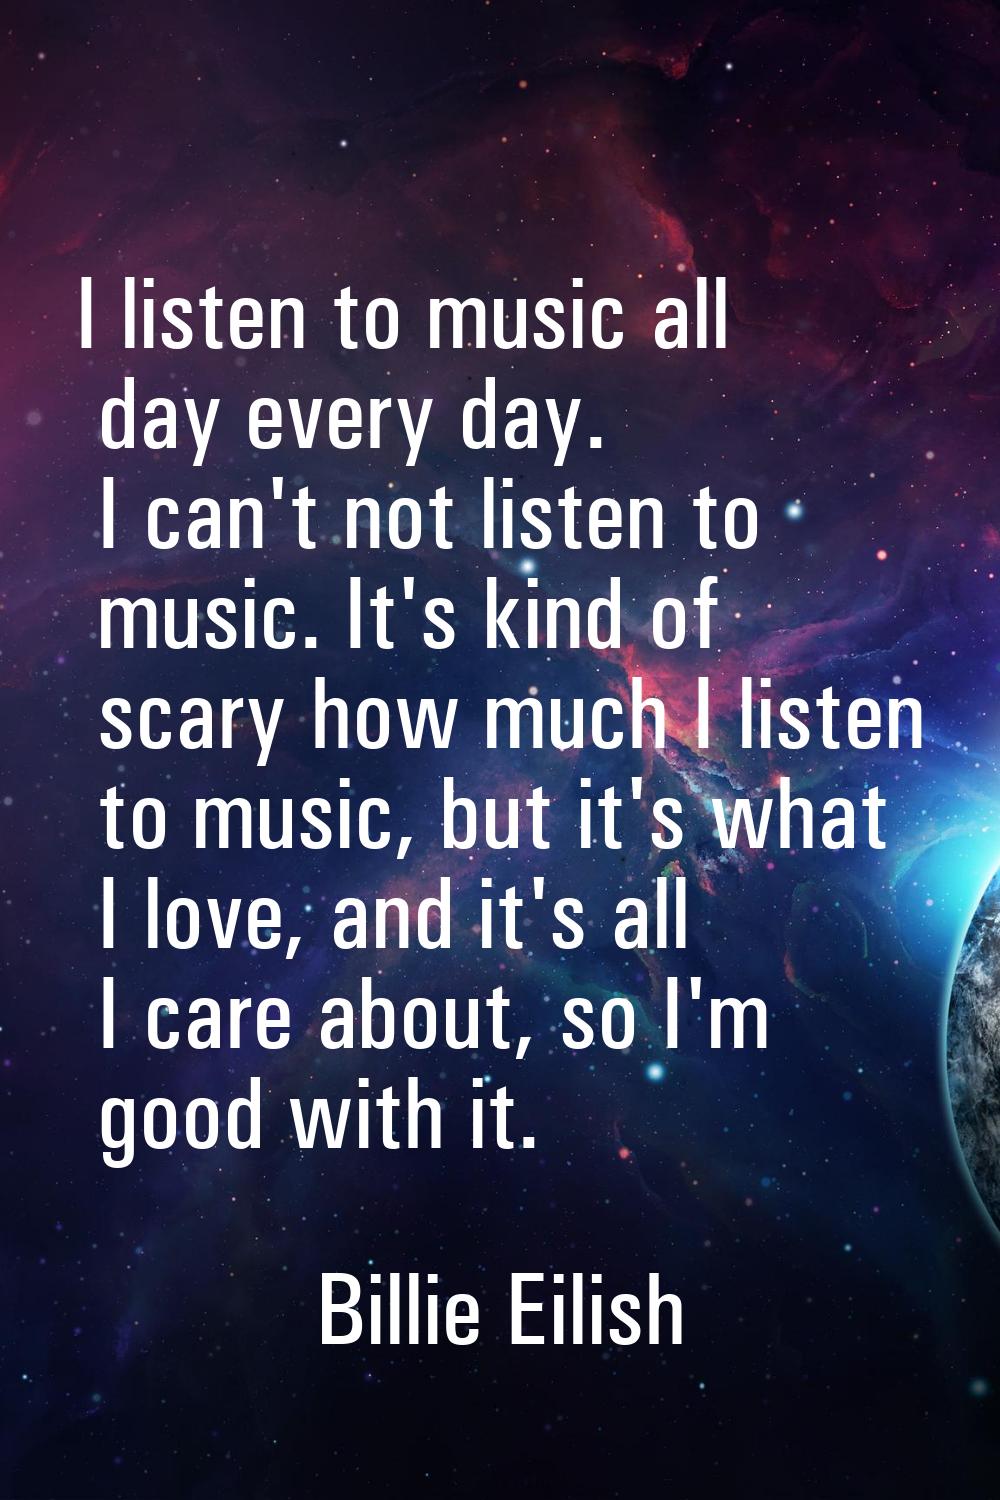 I listen to music all day every day. I can't not listen to music. It's kind of scary how much I lis